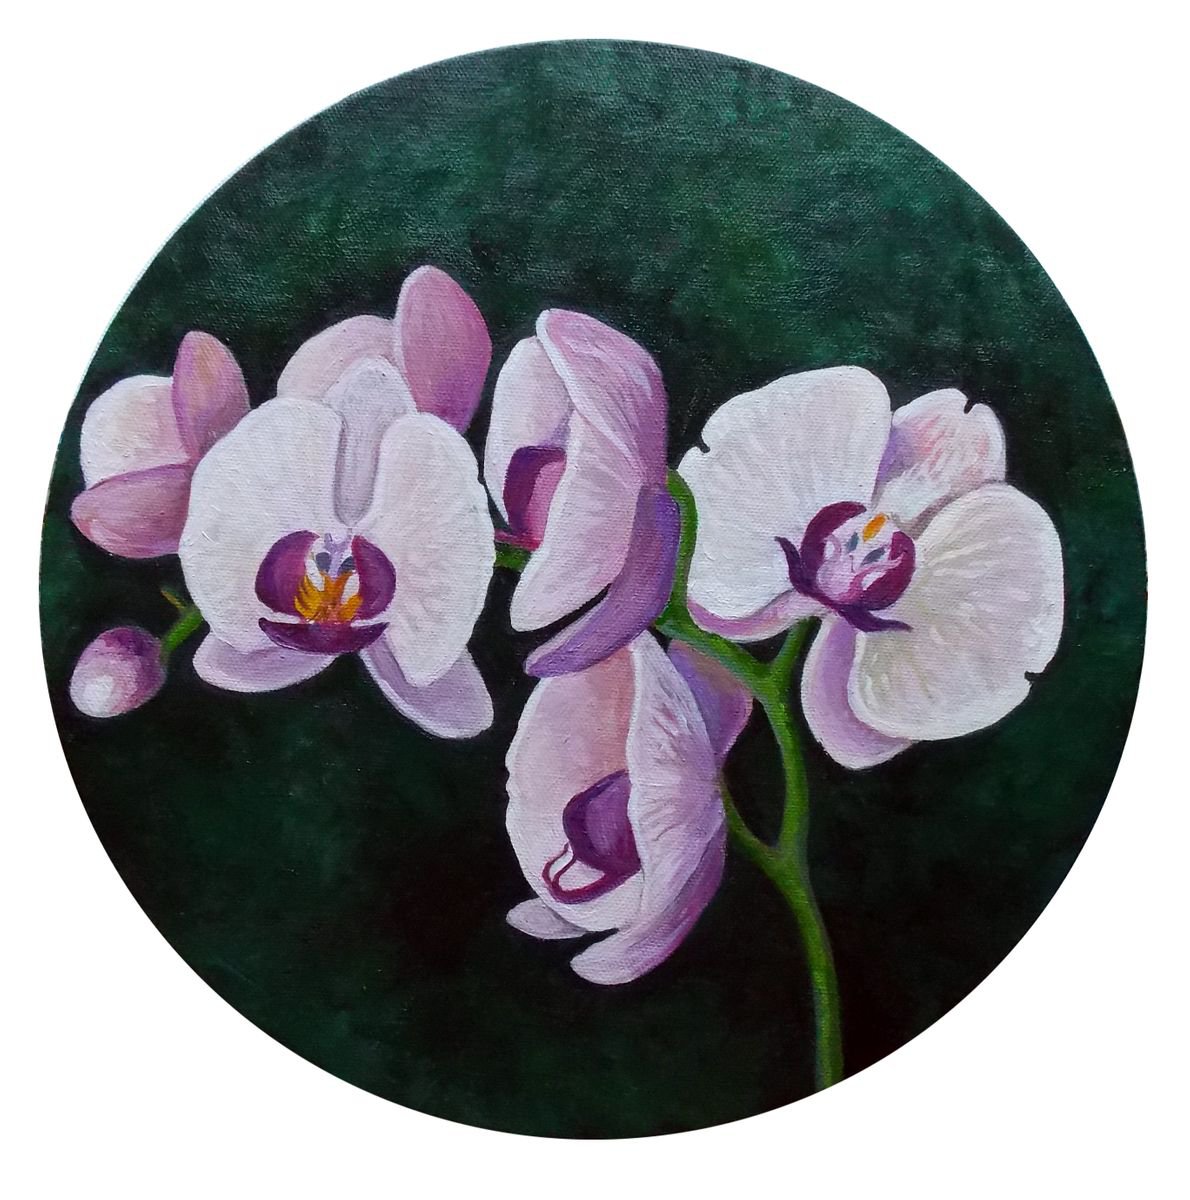 Phalaenopsis Orchids, Floral Original Oil Painting on Round Canvas by Adriana Vasile